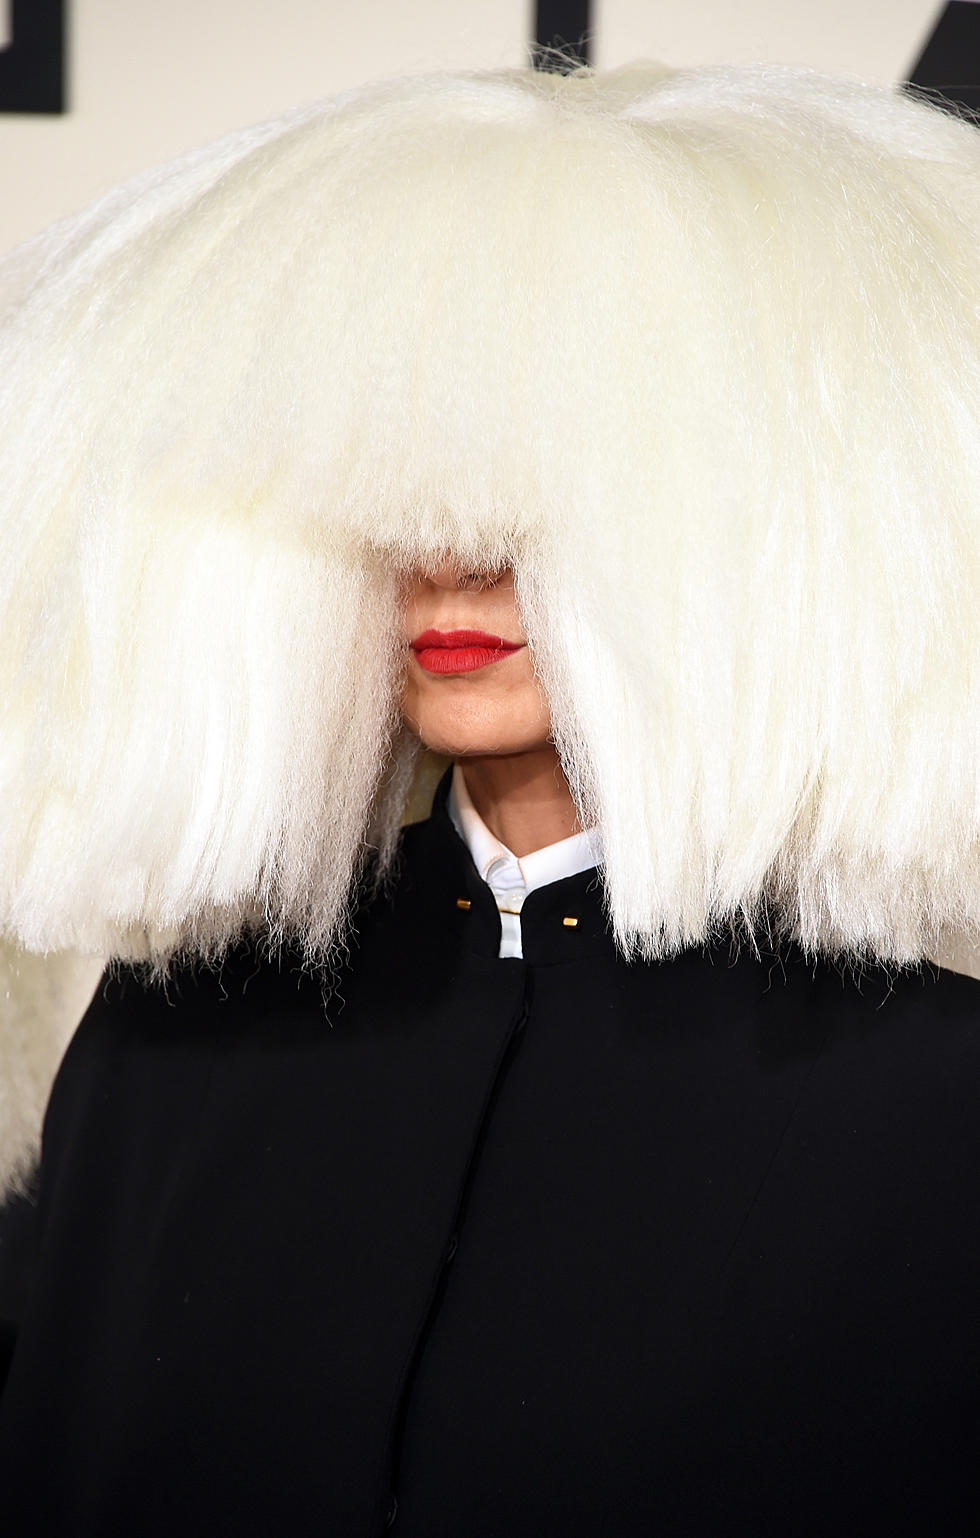 Why Does Sia Hide Her Face?